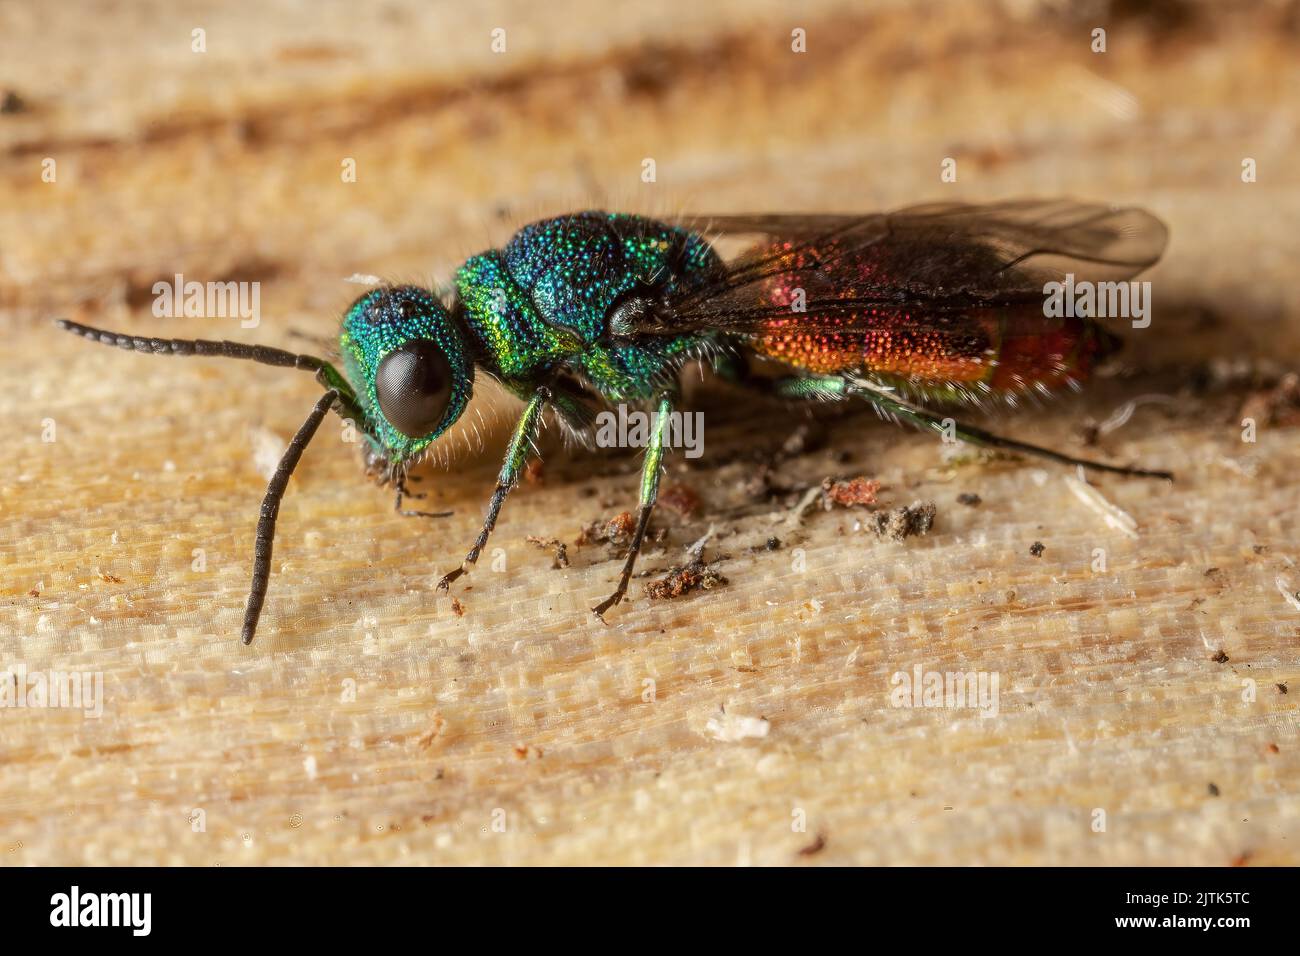 A metallic, iridescent, parasitic ruby-tailed wasp photographed in a Kentish garden in England. Stock Photo